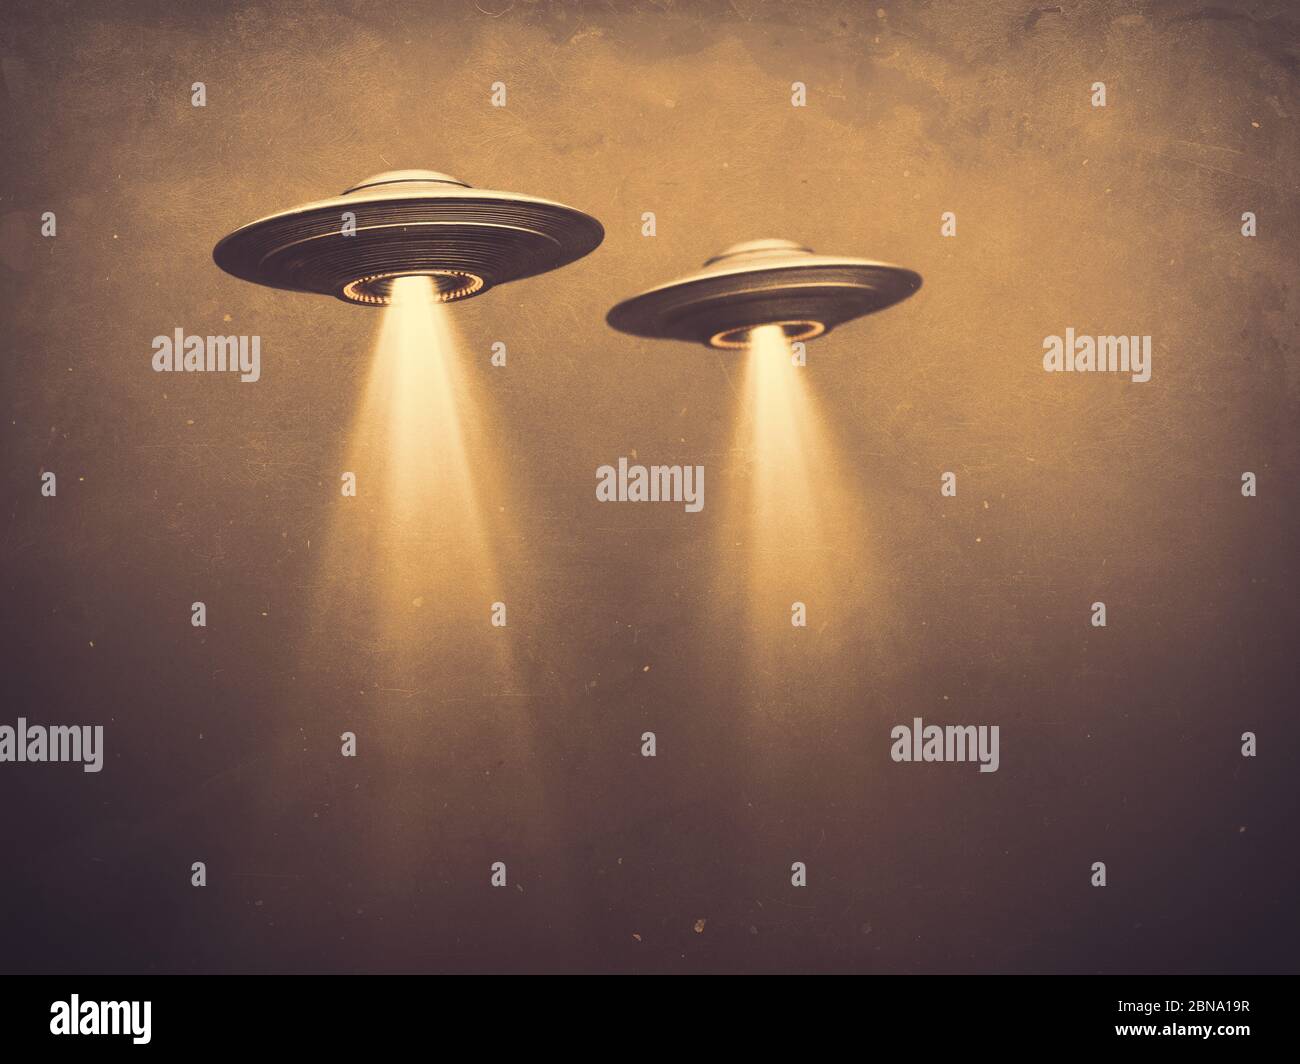 Two UFOs flying in fog with light below. 3D illustration monochromatic sepia-toned old-time photography. Concept image with blank space below the UFOs Stock Photo